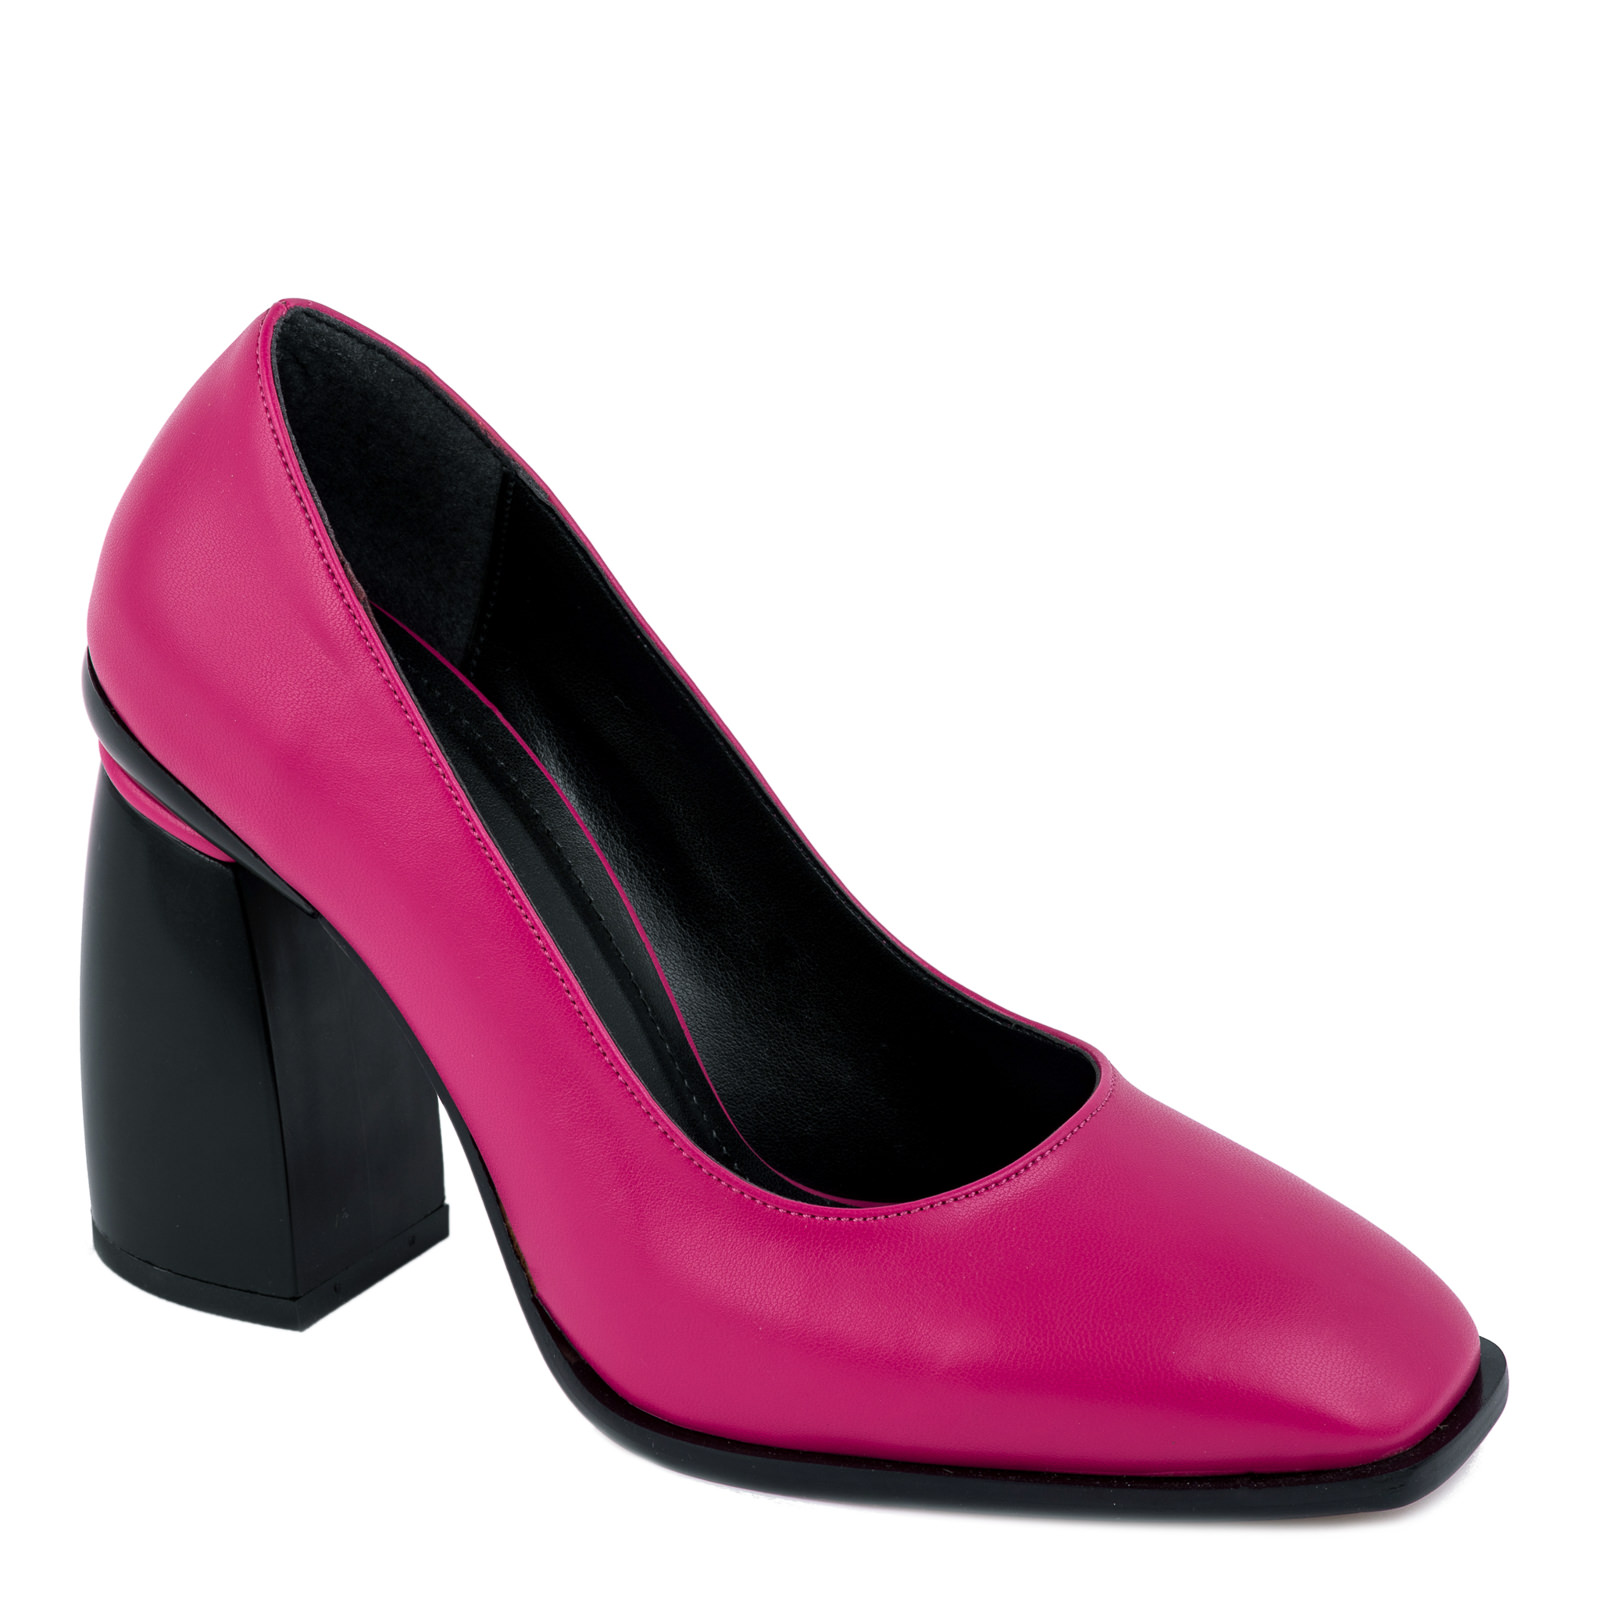 STILETTO SHOES WITH THICK HEEL - PINK/BLACK